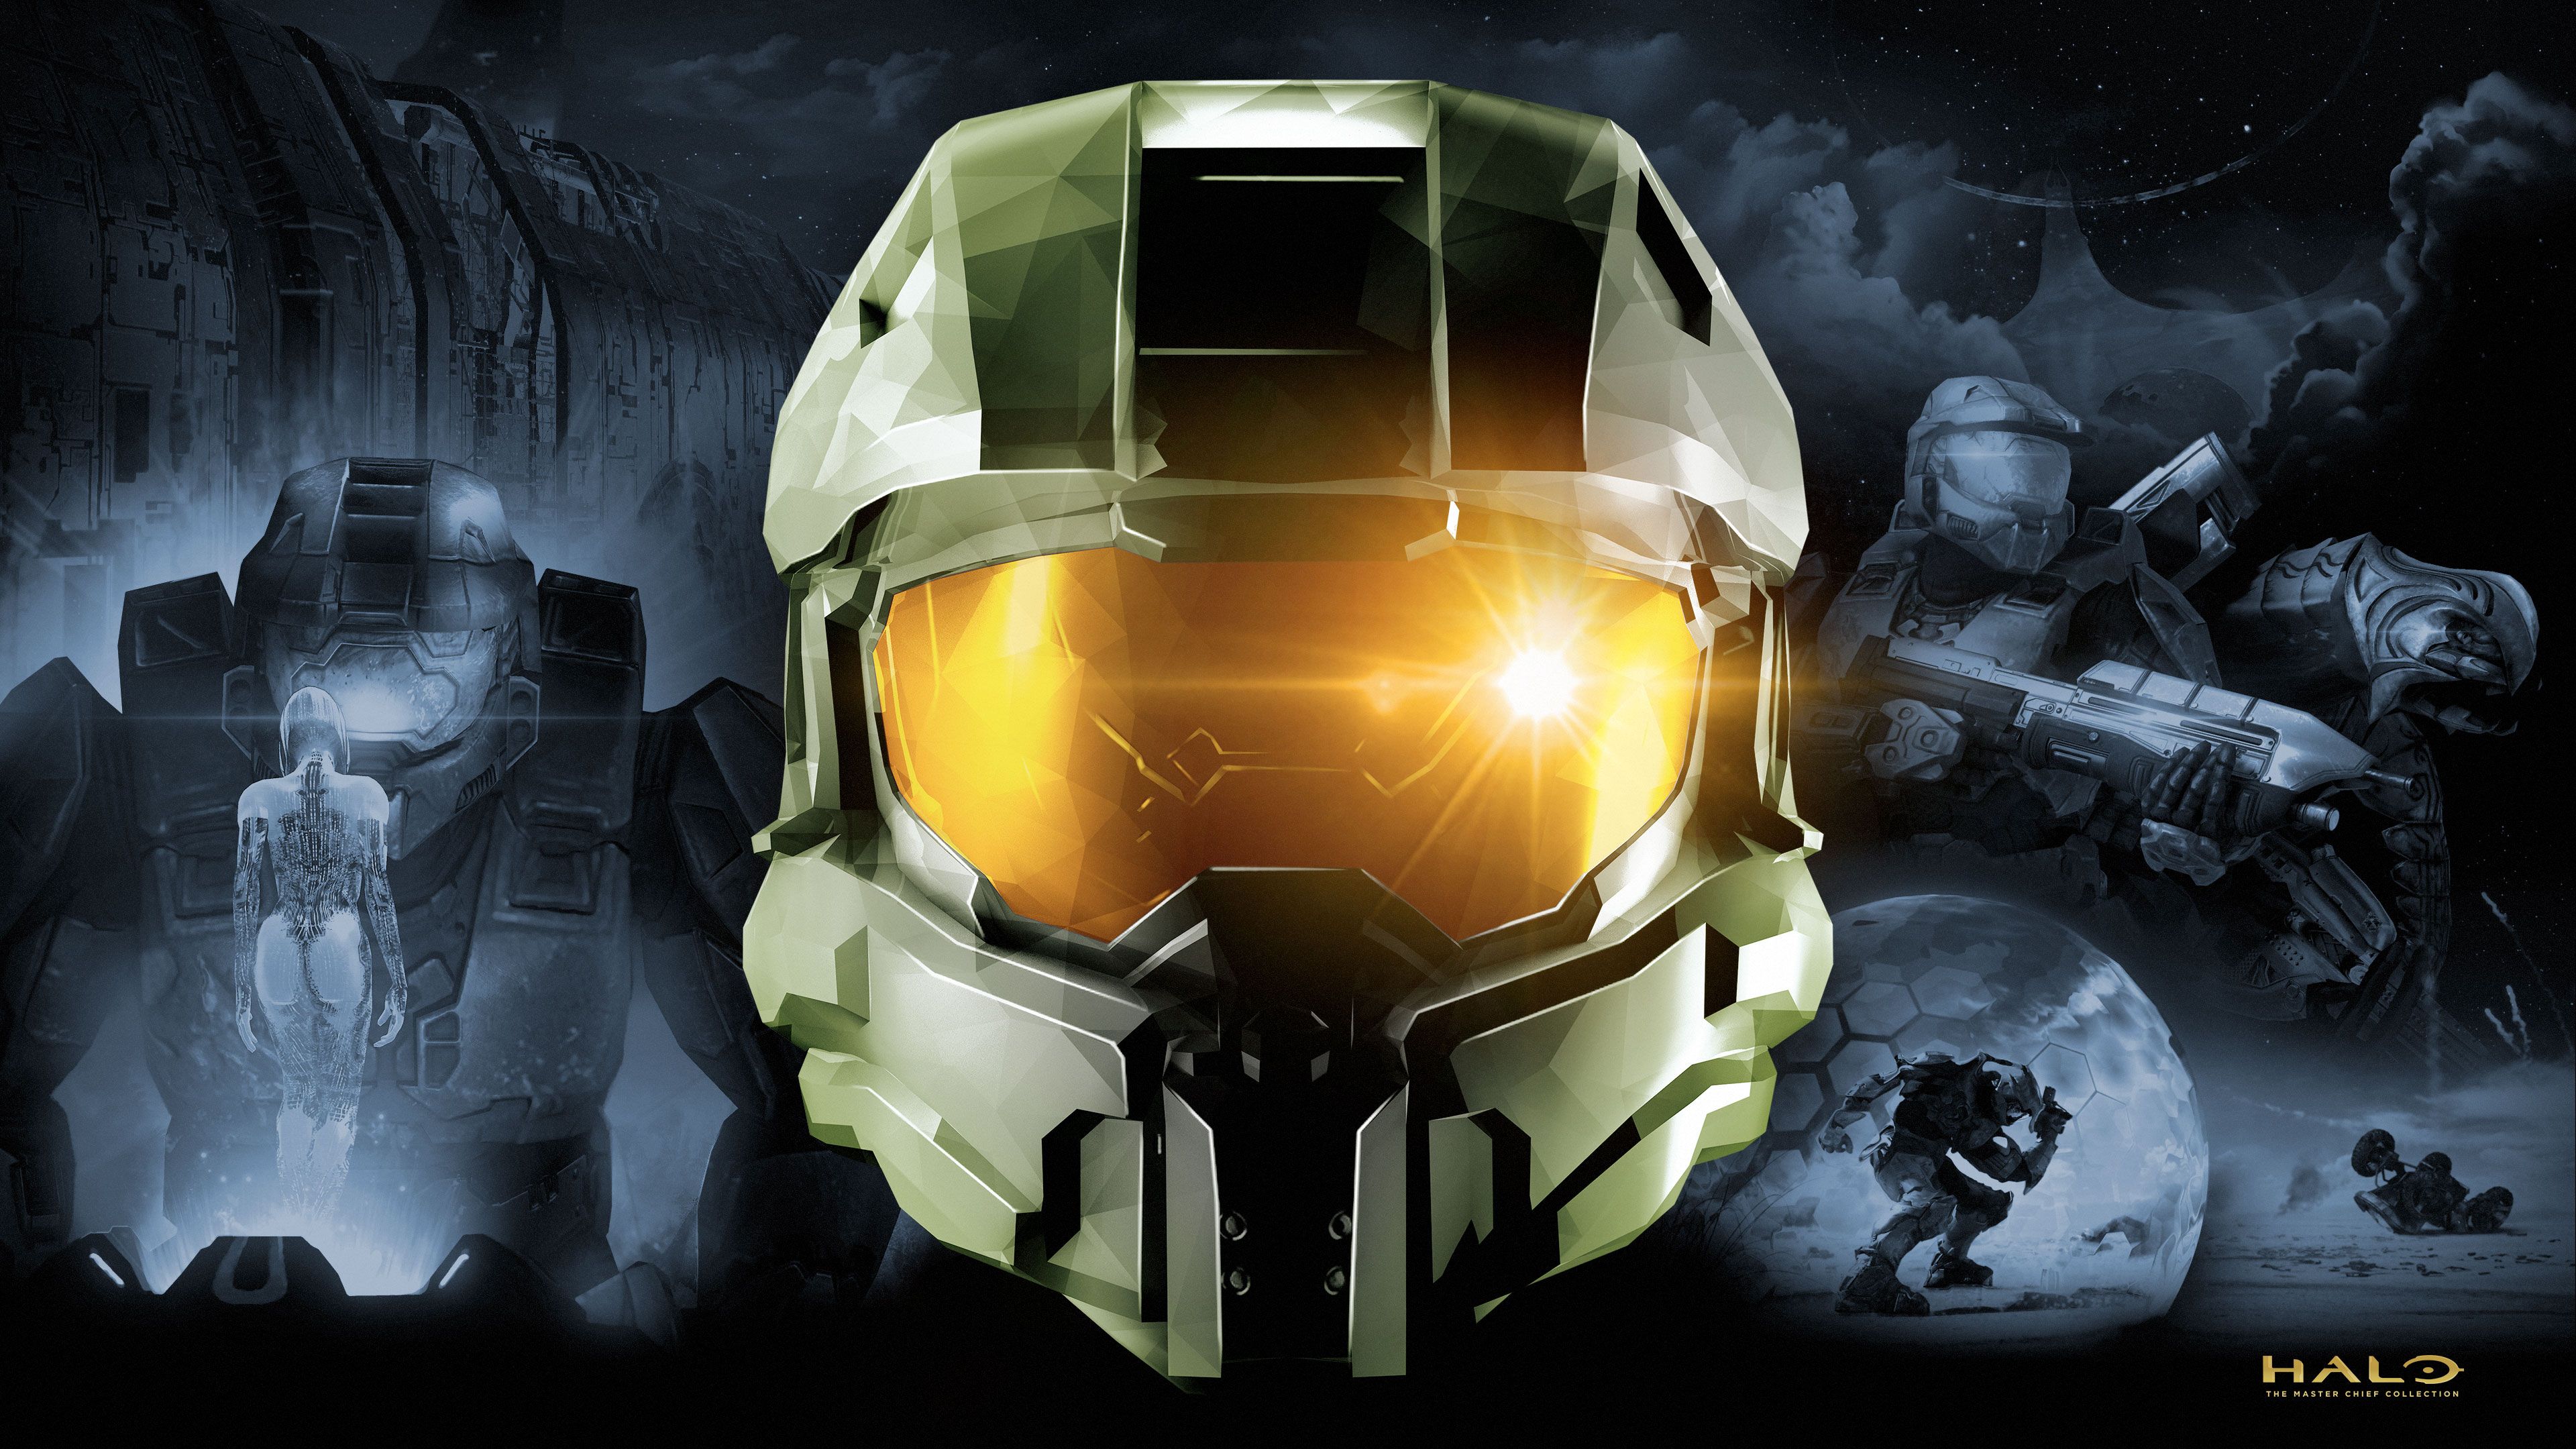 Halo 3 Screenshots and Wallpaper!. Halo: The Master Chief Collection (PC). Forums